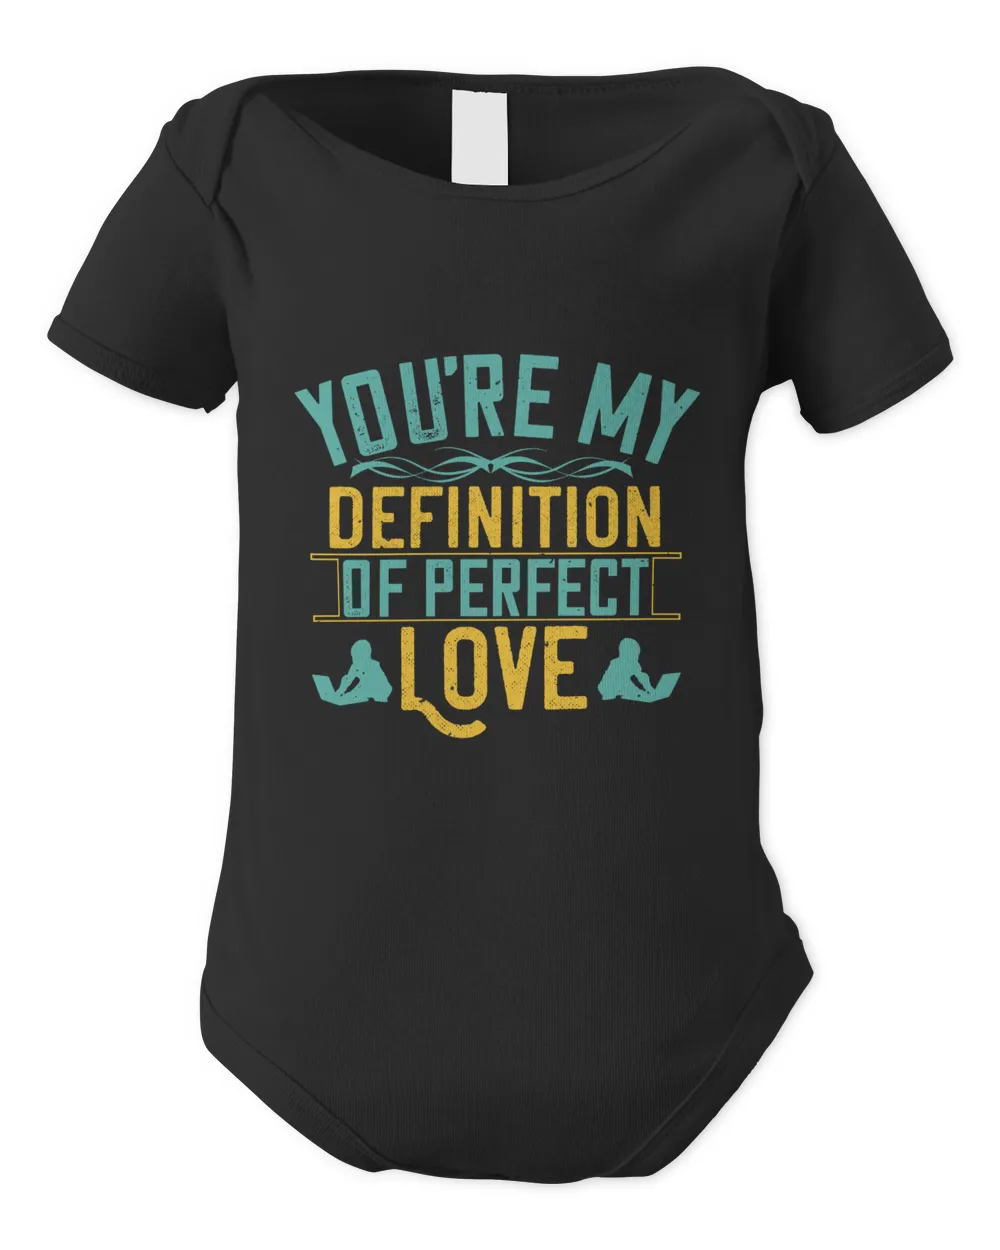 You’re My Definition Of Perfect. Love Baby Shirt, Gift For Family, Toddler T Shirt, Baby Bodysuit